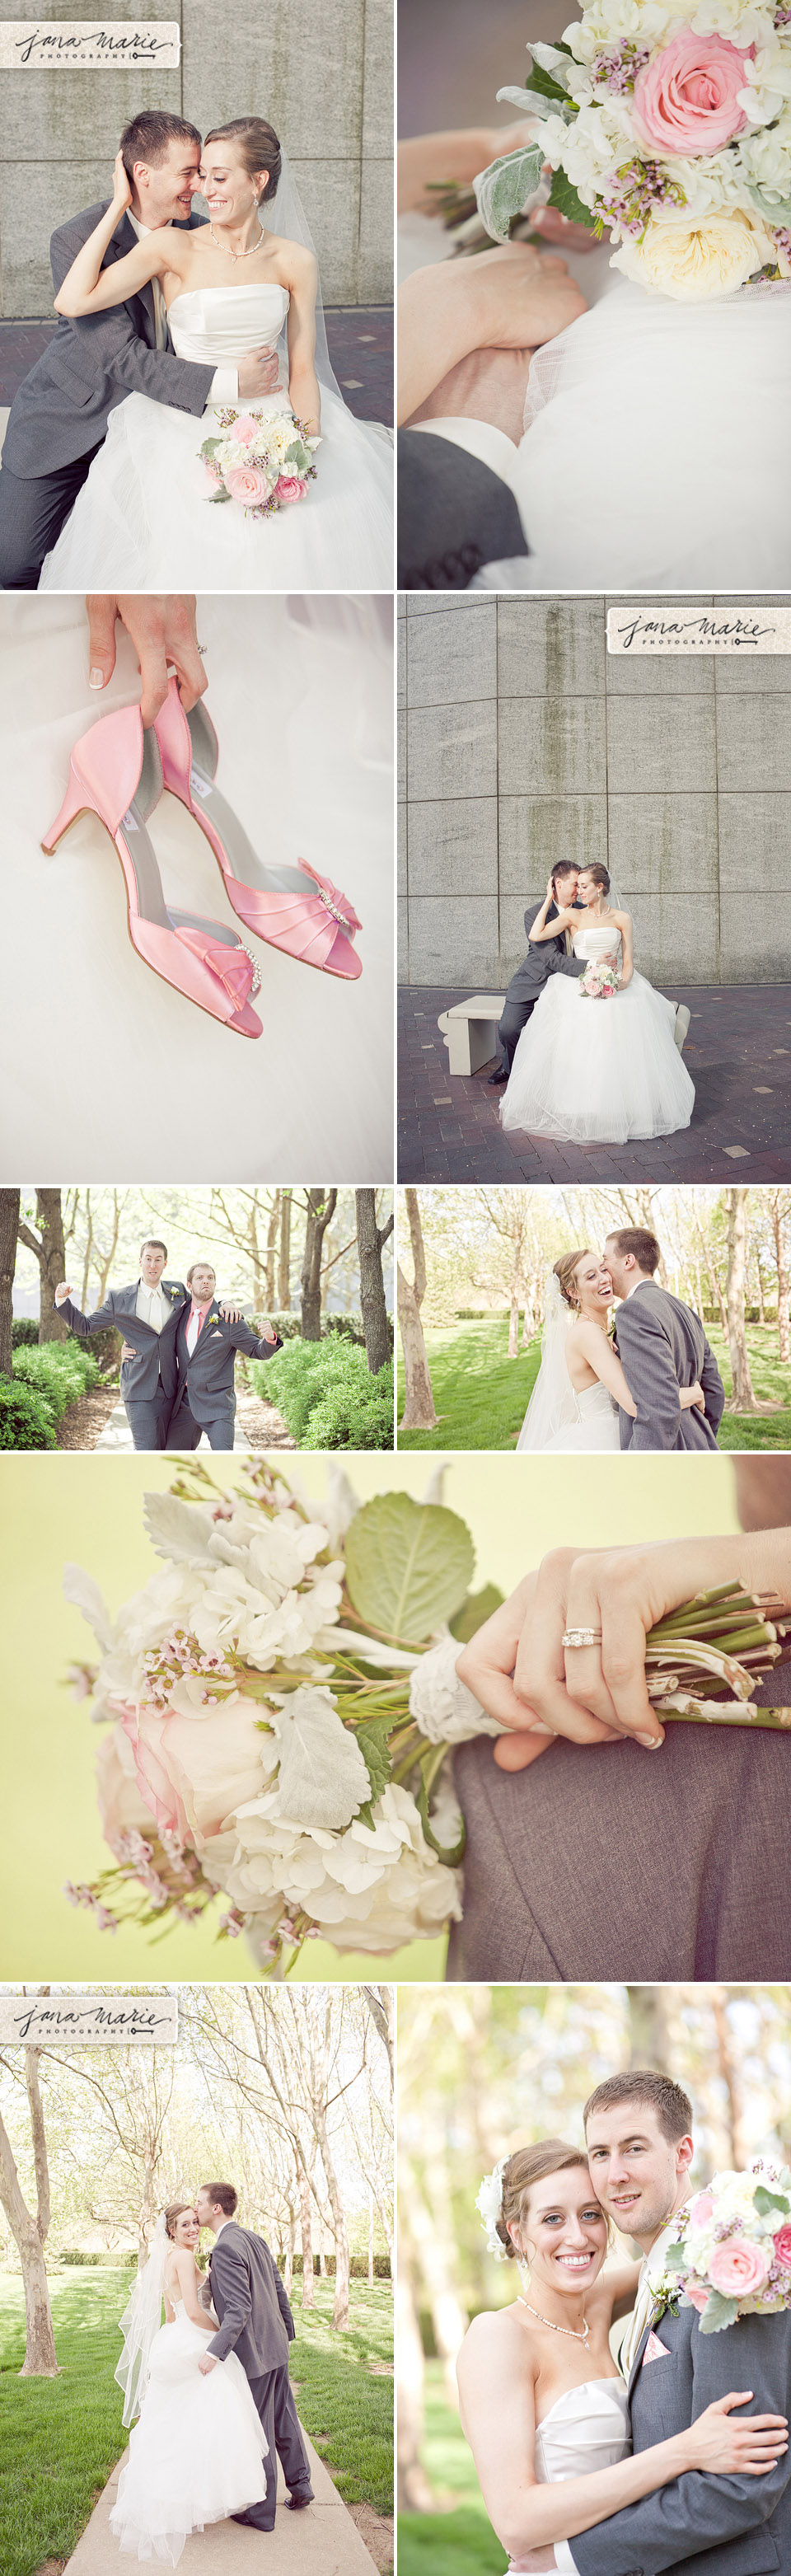 Ring shots, pink heels, couple, portraits, KC wedding photography, Jana Marie Photography, silly grooms